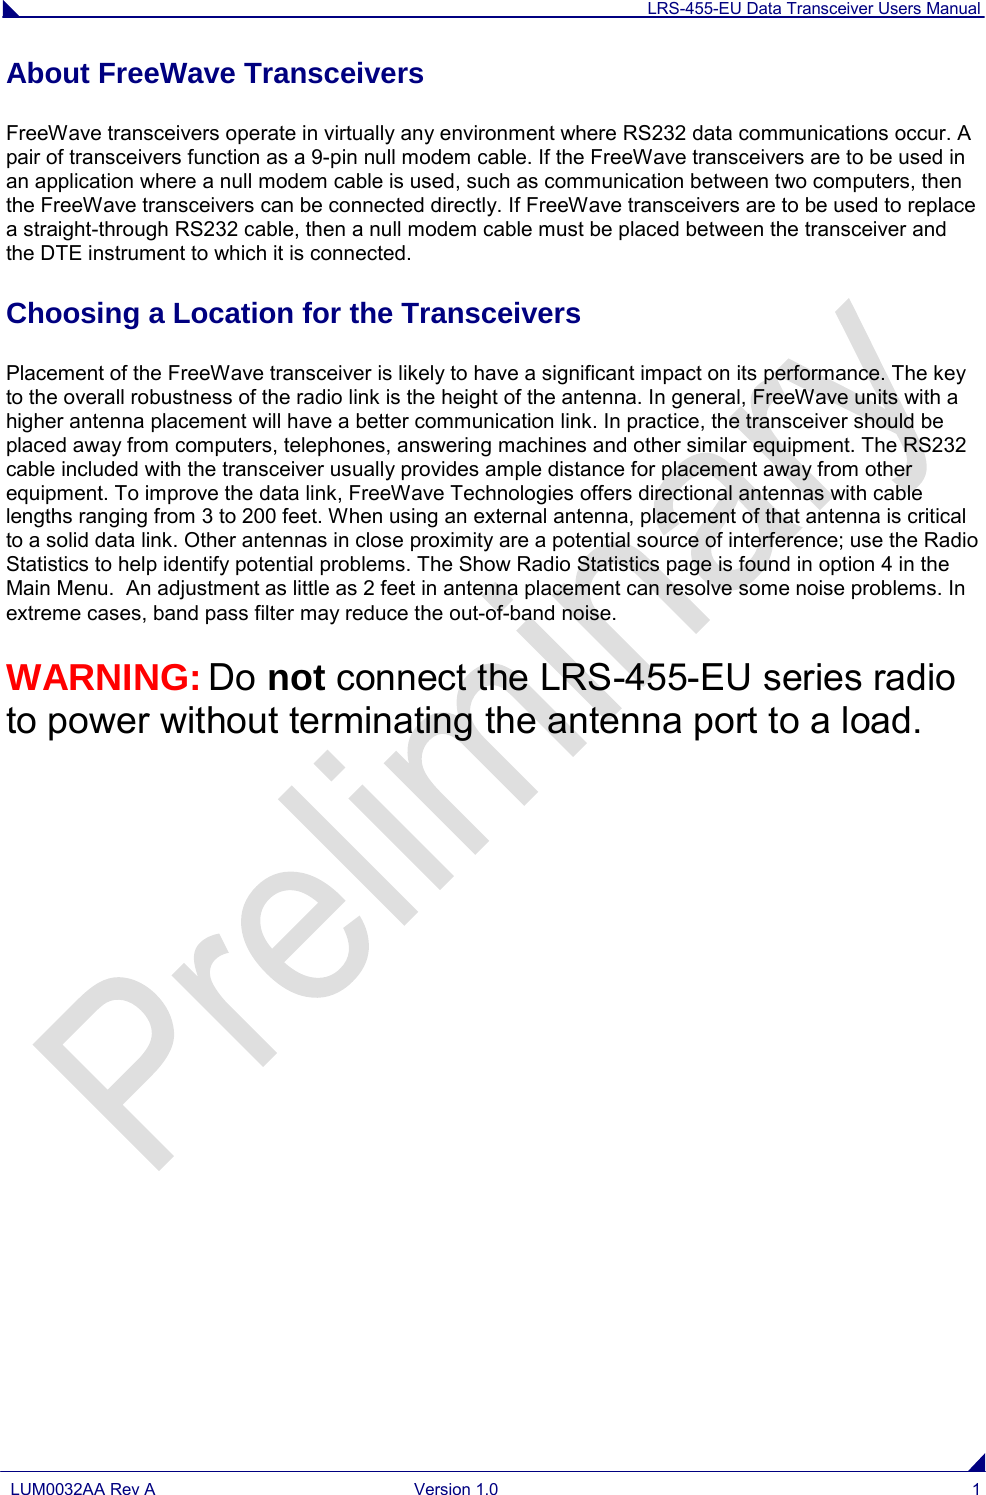 LRS-455-EU Data Transceiver Users Manual  LUM0032AA Rev A Version 1.0  1  About FreeWave Transceivers FreeWave transceivers operate in virtually any environment where RS232 data communications occur. A pair of transceivers function as a 9-pin null modem cable. If the FreeWave transceivers are to be used in an application where a null modem cable is used, such as communication between two computers, then the FreeWave transceivers can be connected directly. If FreeWave transceivers are to be used to replace a straight-through RS232 cable, then a null modem cable must be placed between the transceiver and the DTE instrument to which it is connected. Choosing a Location for the Transceivers Placement of the FreeWave transceiver is likely to have a significant impact on its performance. The key to the overall robustness of the radio link is the height of the antenna. In general, FreeWave units with a higher antenna placement will have a better communication link. In practice, the transceiver should be placed away from computers, telephones, answering machines and other similar equipment. The RS232 cable included with the transceiver usually provides ample distance for placement away from other equipment. To improve the data link, FreeWave Technologies offers directional antennas with cable lengths ranging from 3 to 200 feet. When using an external antenna, placement of that antenna is critical to a solid data link. Other antennas in close proximity are a potential source of interference; use the Radio Statistics to help identify potential problems. The Show Radio Statistics page is found in option 4 in the Main Menu.  An adjustment as little as 2 feet in antenna placement can resolve some noise problems. In extreme cases, band pass filter may reduce the out-of-band noise. WARNING: Do not connect the LRS-455-EU series radio to power without terminating the antenna port to a load.